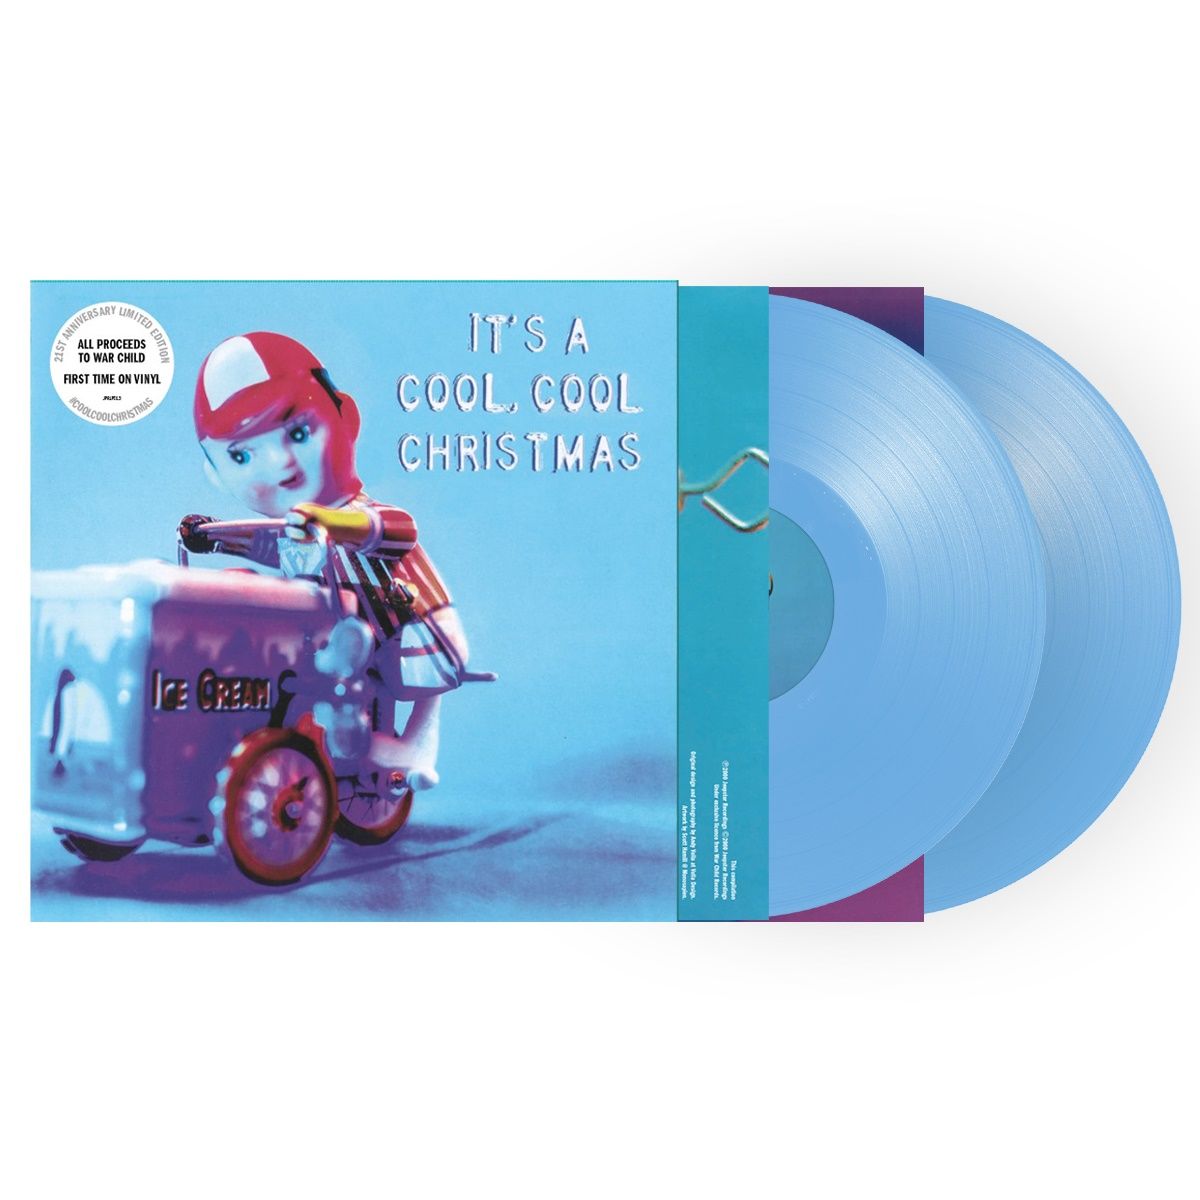 It's A Cool, Cool Christmas: Curacao Blue Vinyl